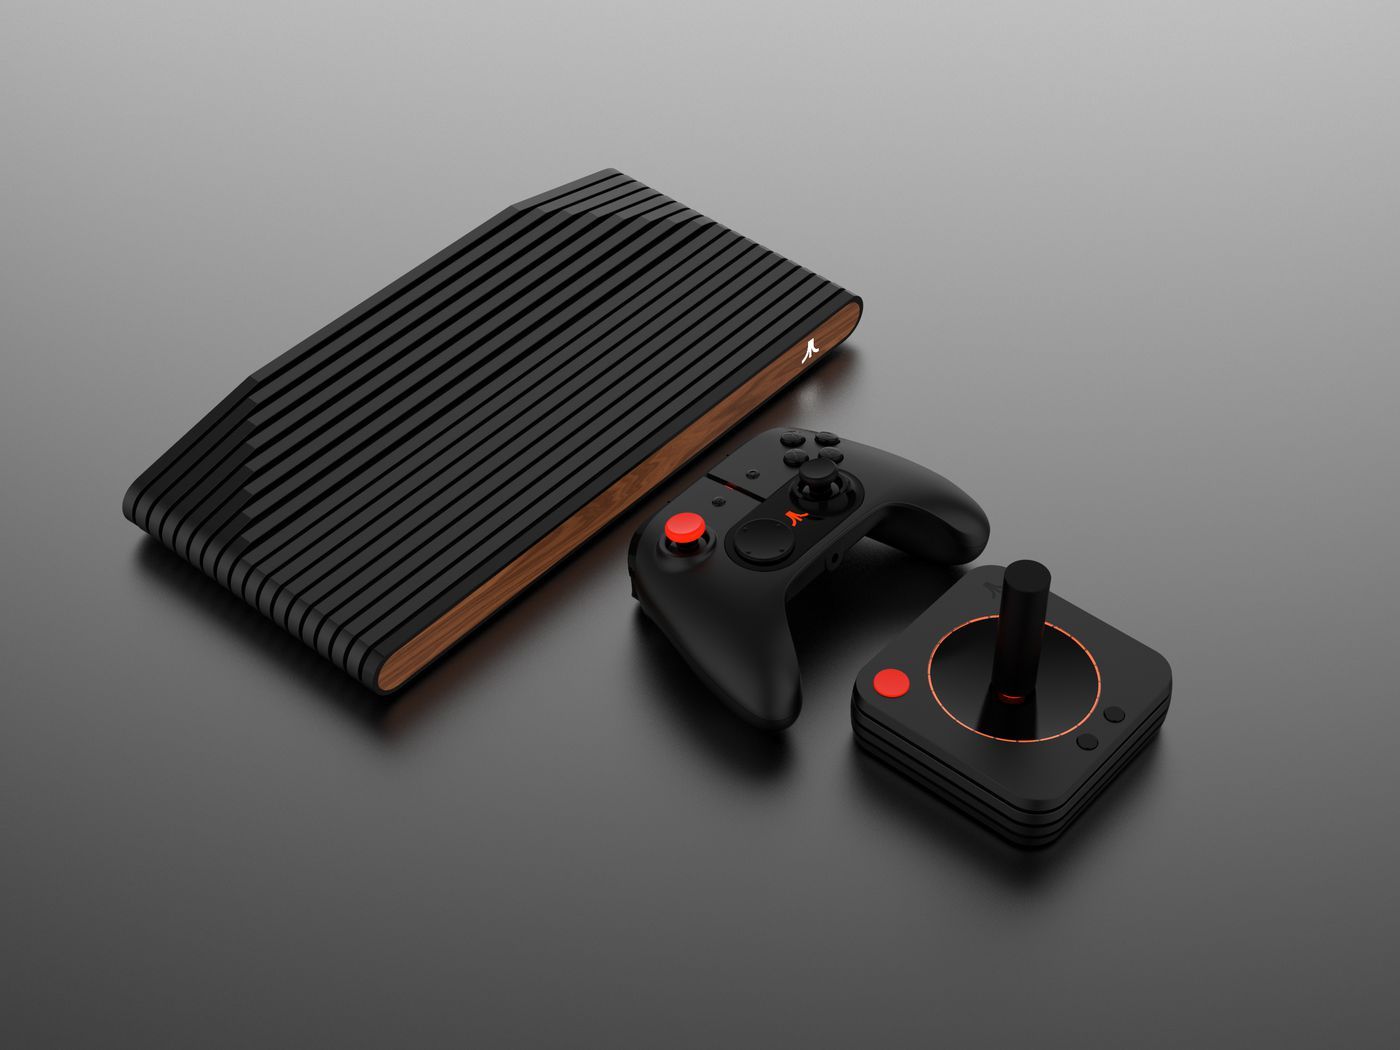 Atari's retro VCS console is now available for preorder